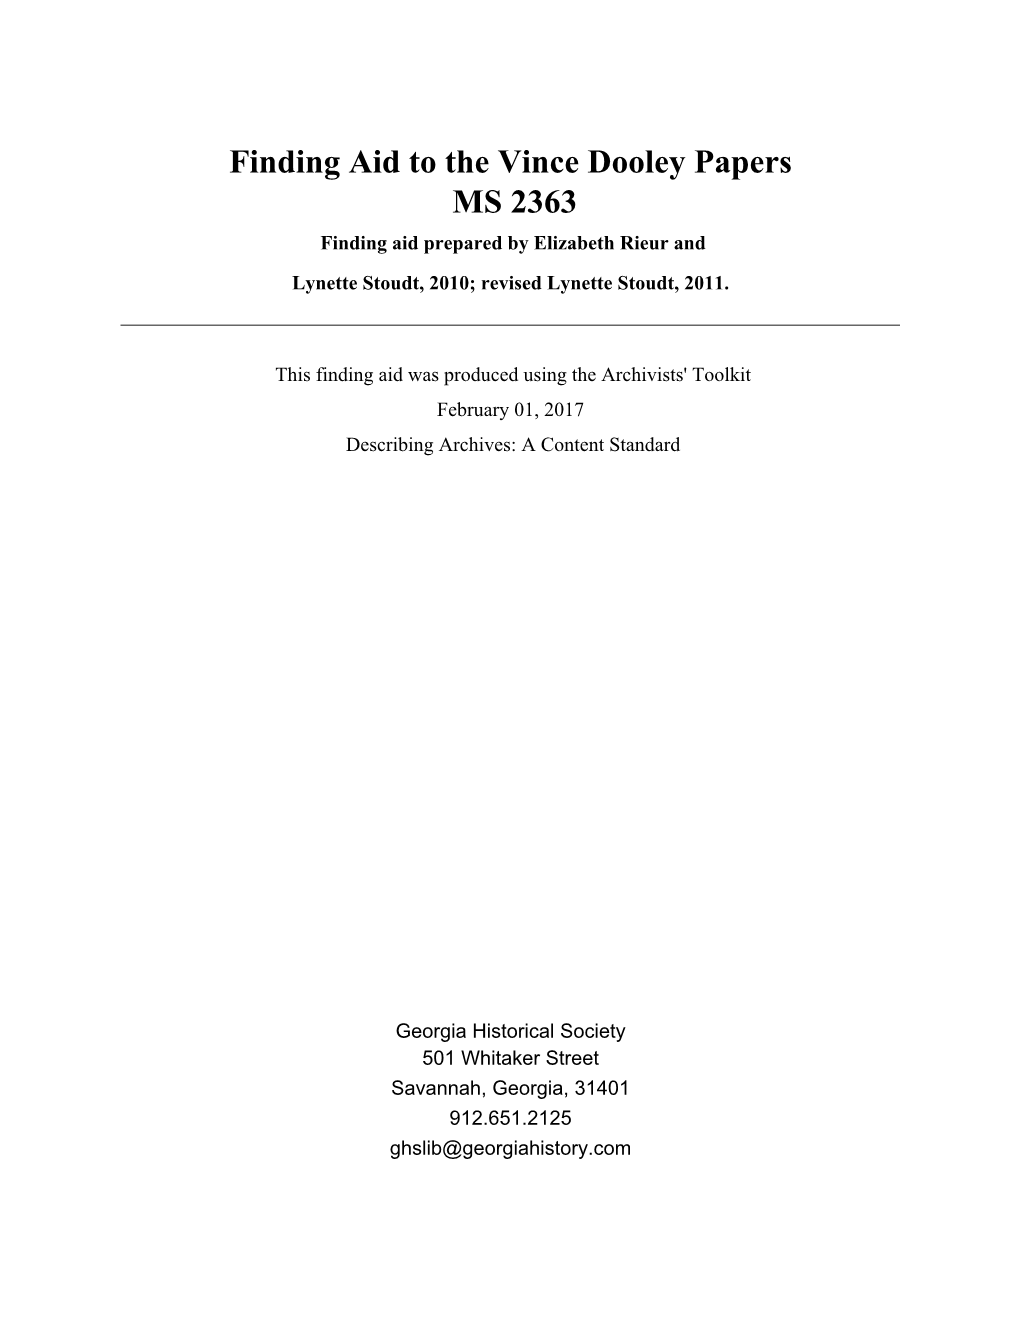 Finding Aid to the Vince Dooley Papers MS 2363 Finding Aid Prepared by Elizabeth Rieur and Lynette Stoudt, 2010; Revised Lynette Stoudt, 2011